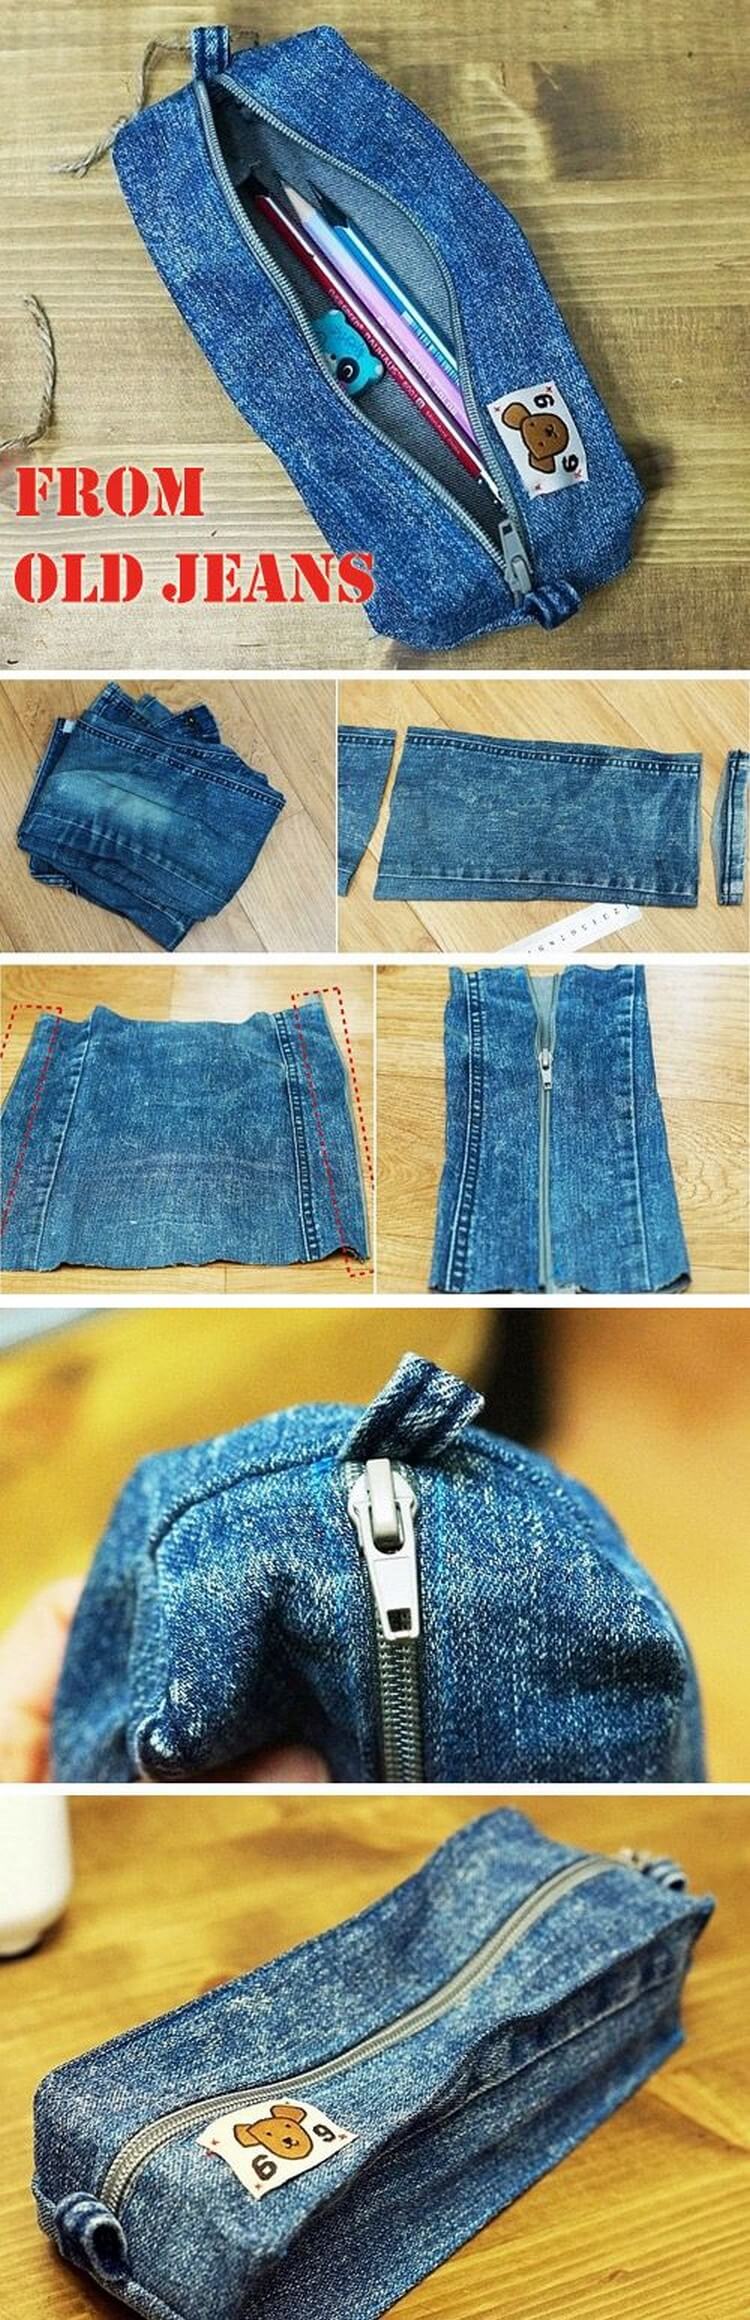 Recycled Jeans into Pencil Box